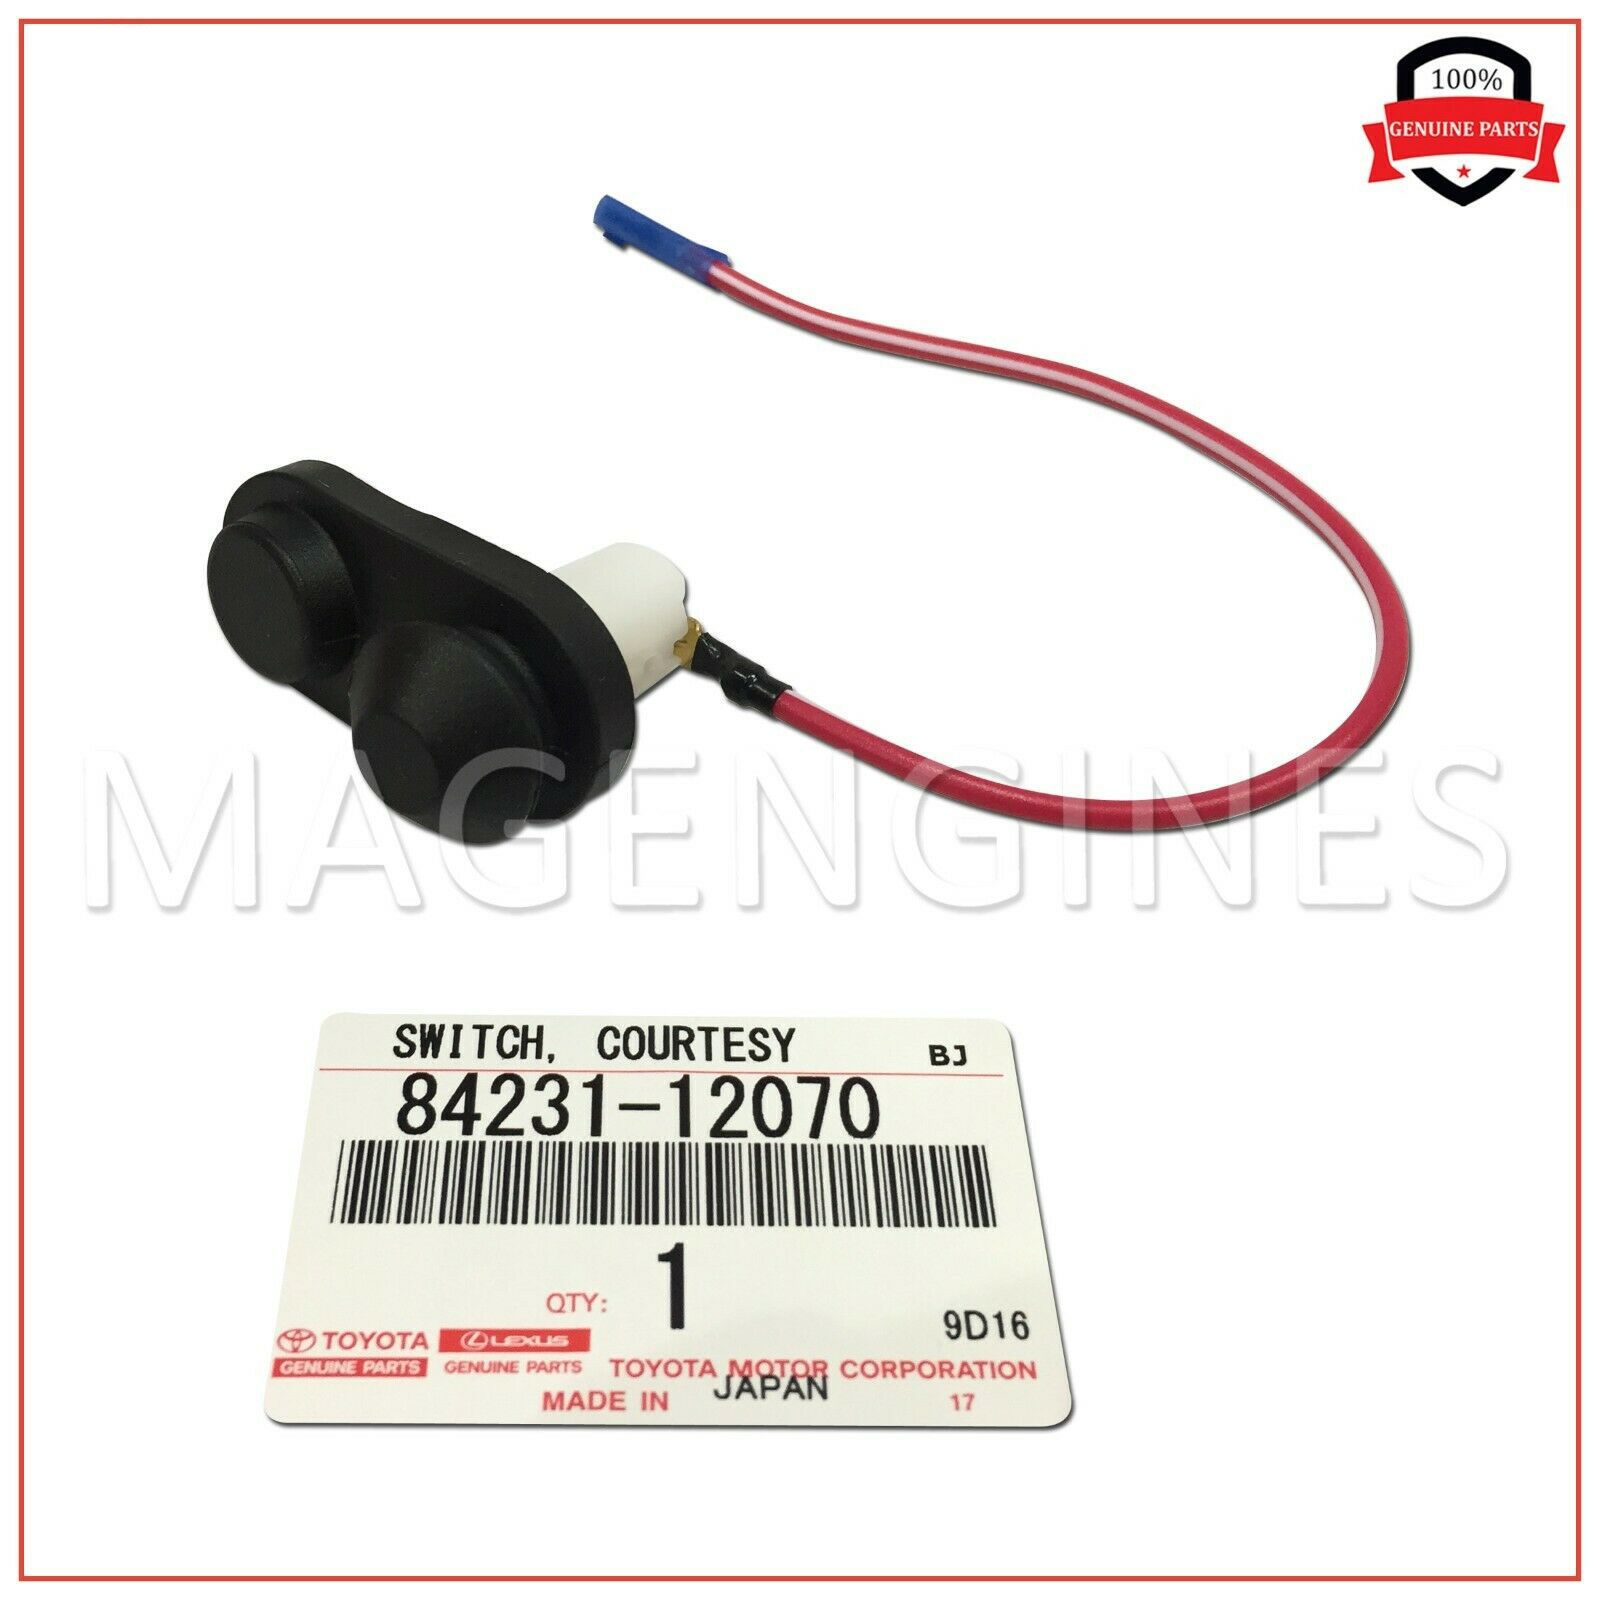 COURTESY LAMP 84231-12070 GENUINE OEM SWITCH ASSY 8423112070 FOR FRONT DOOR